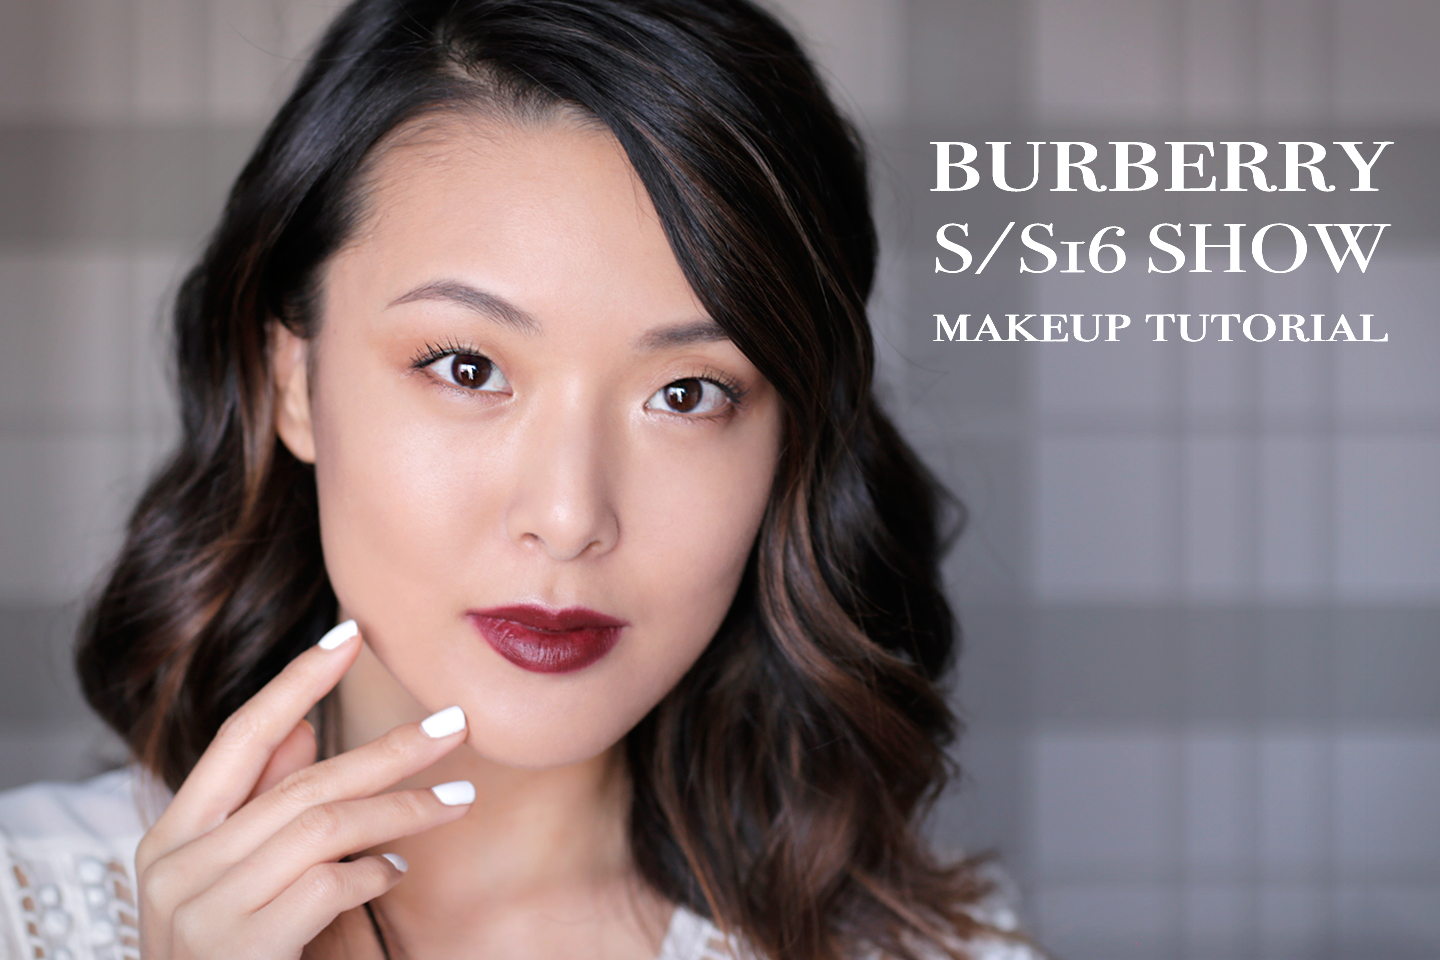 Burberry Makeup Tutorial From Head To Toe Bloglovin